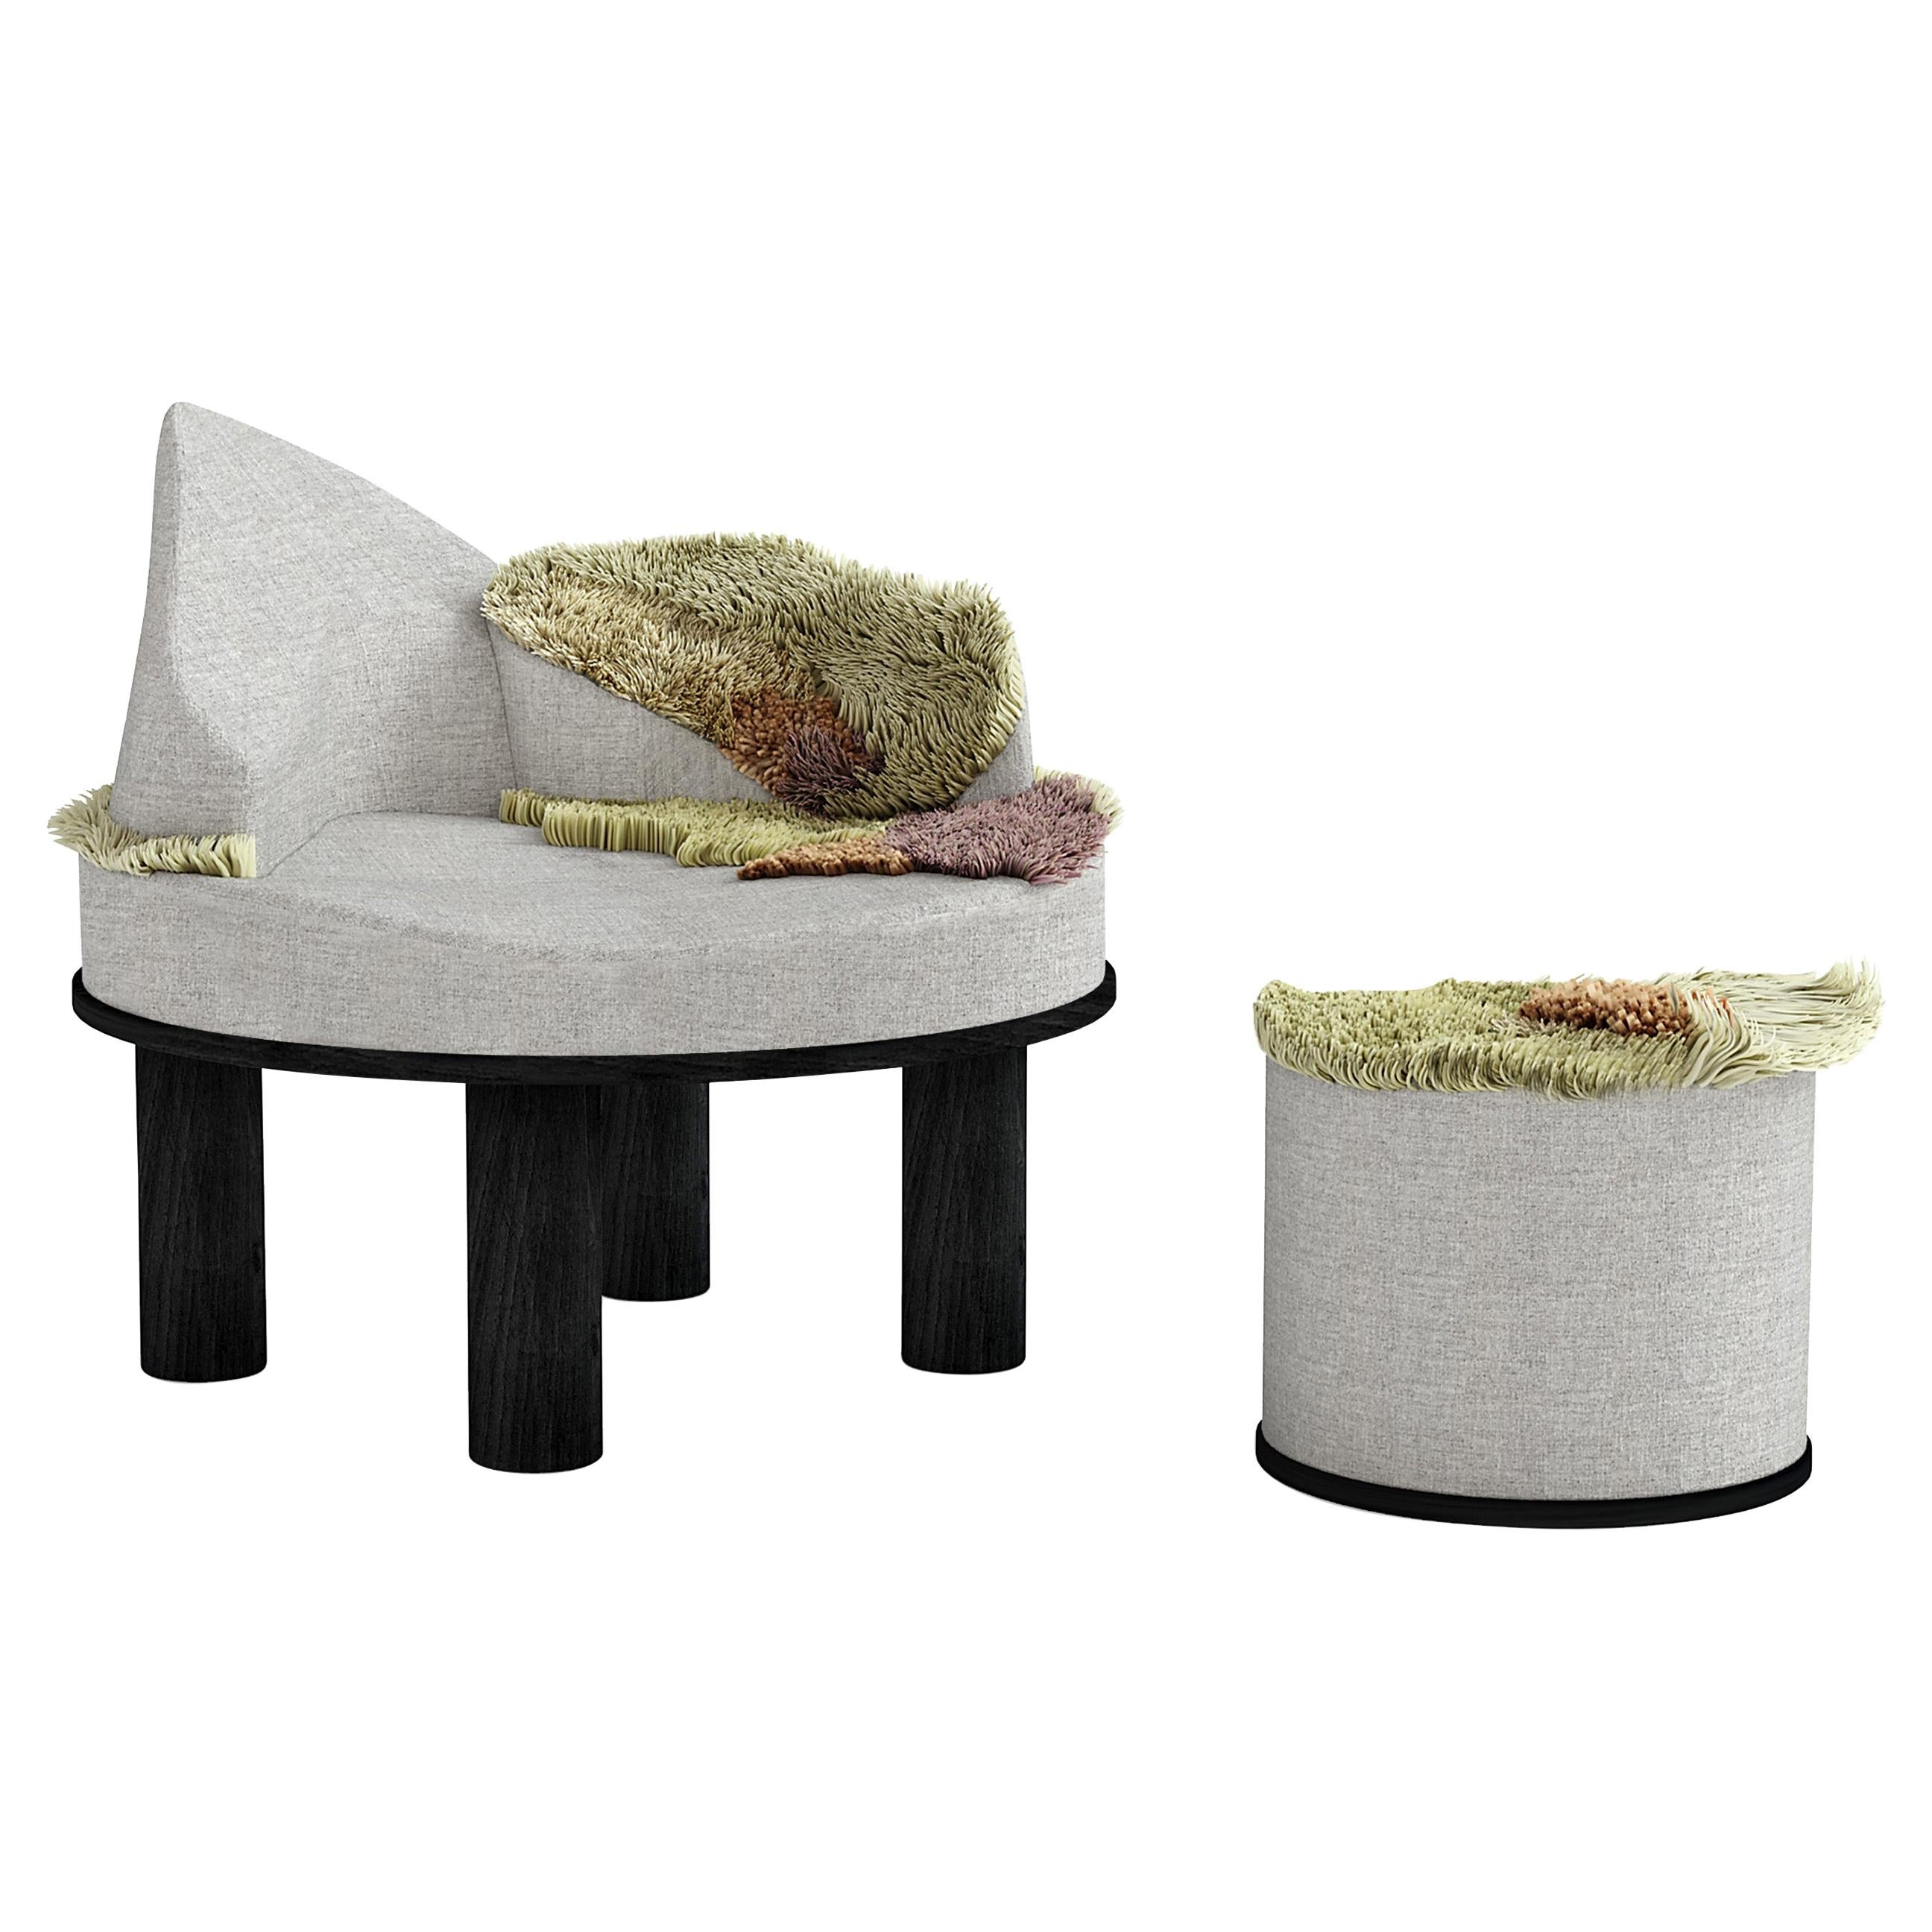 Round Fabric Bench with Pouf from Wild Gardens of Oudolf Collection